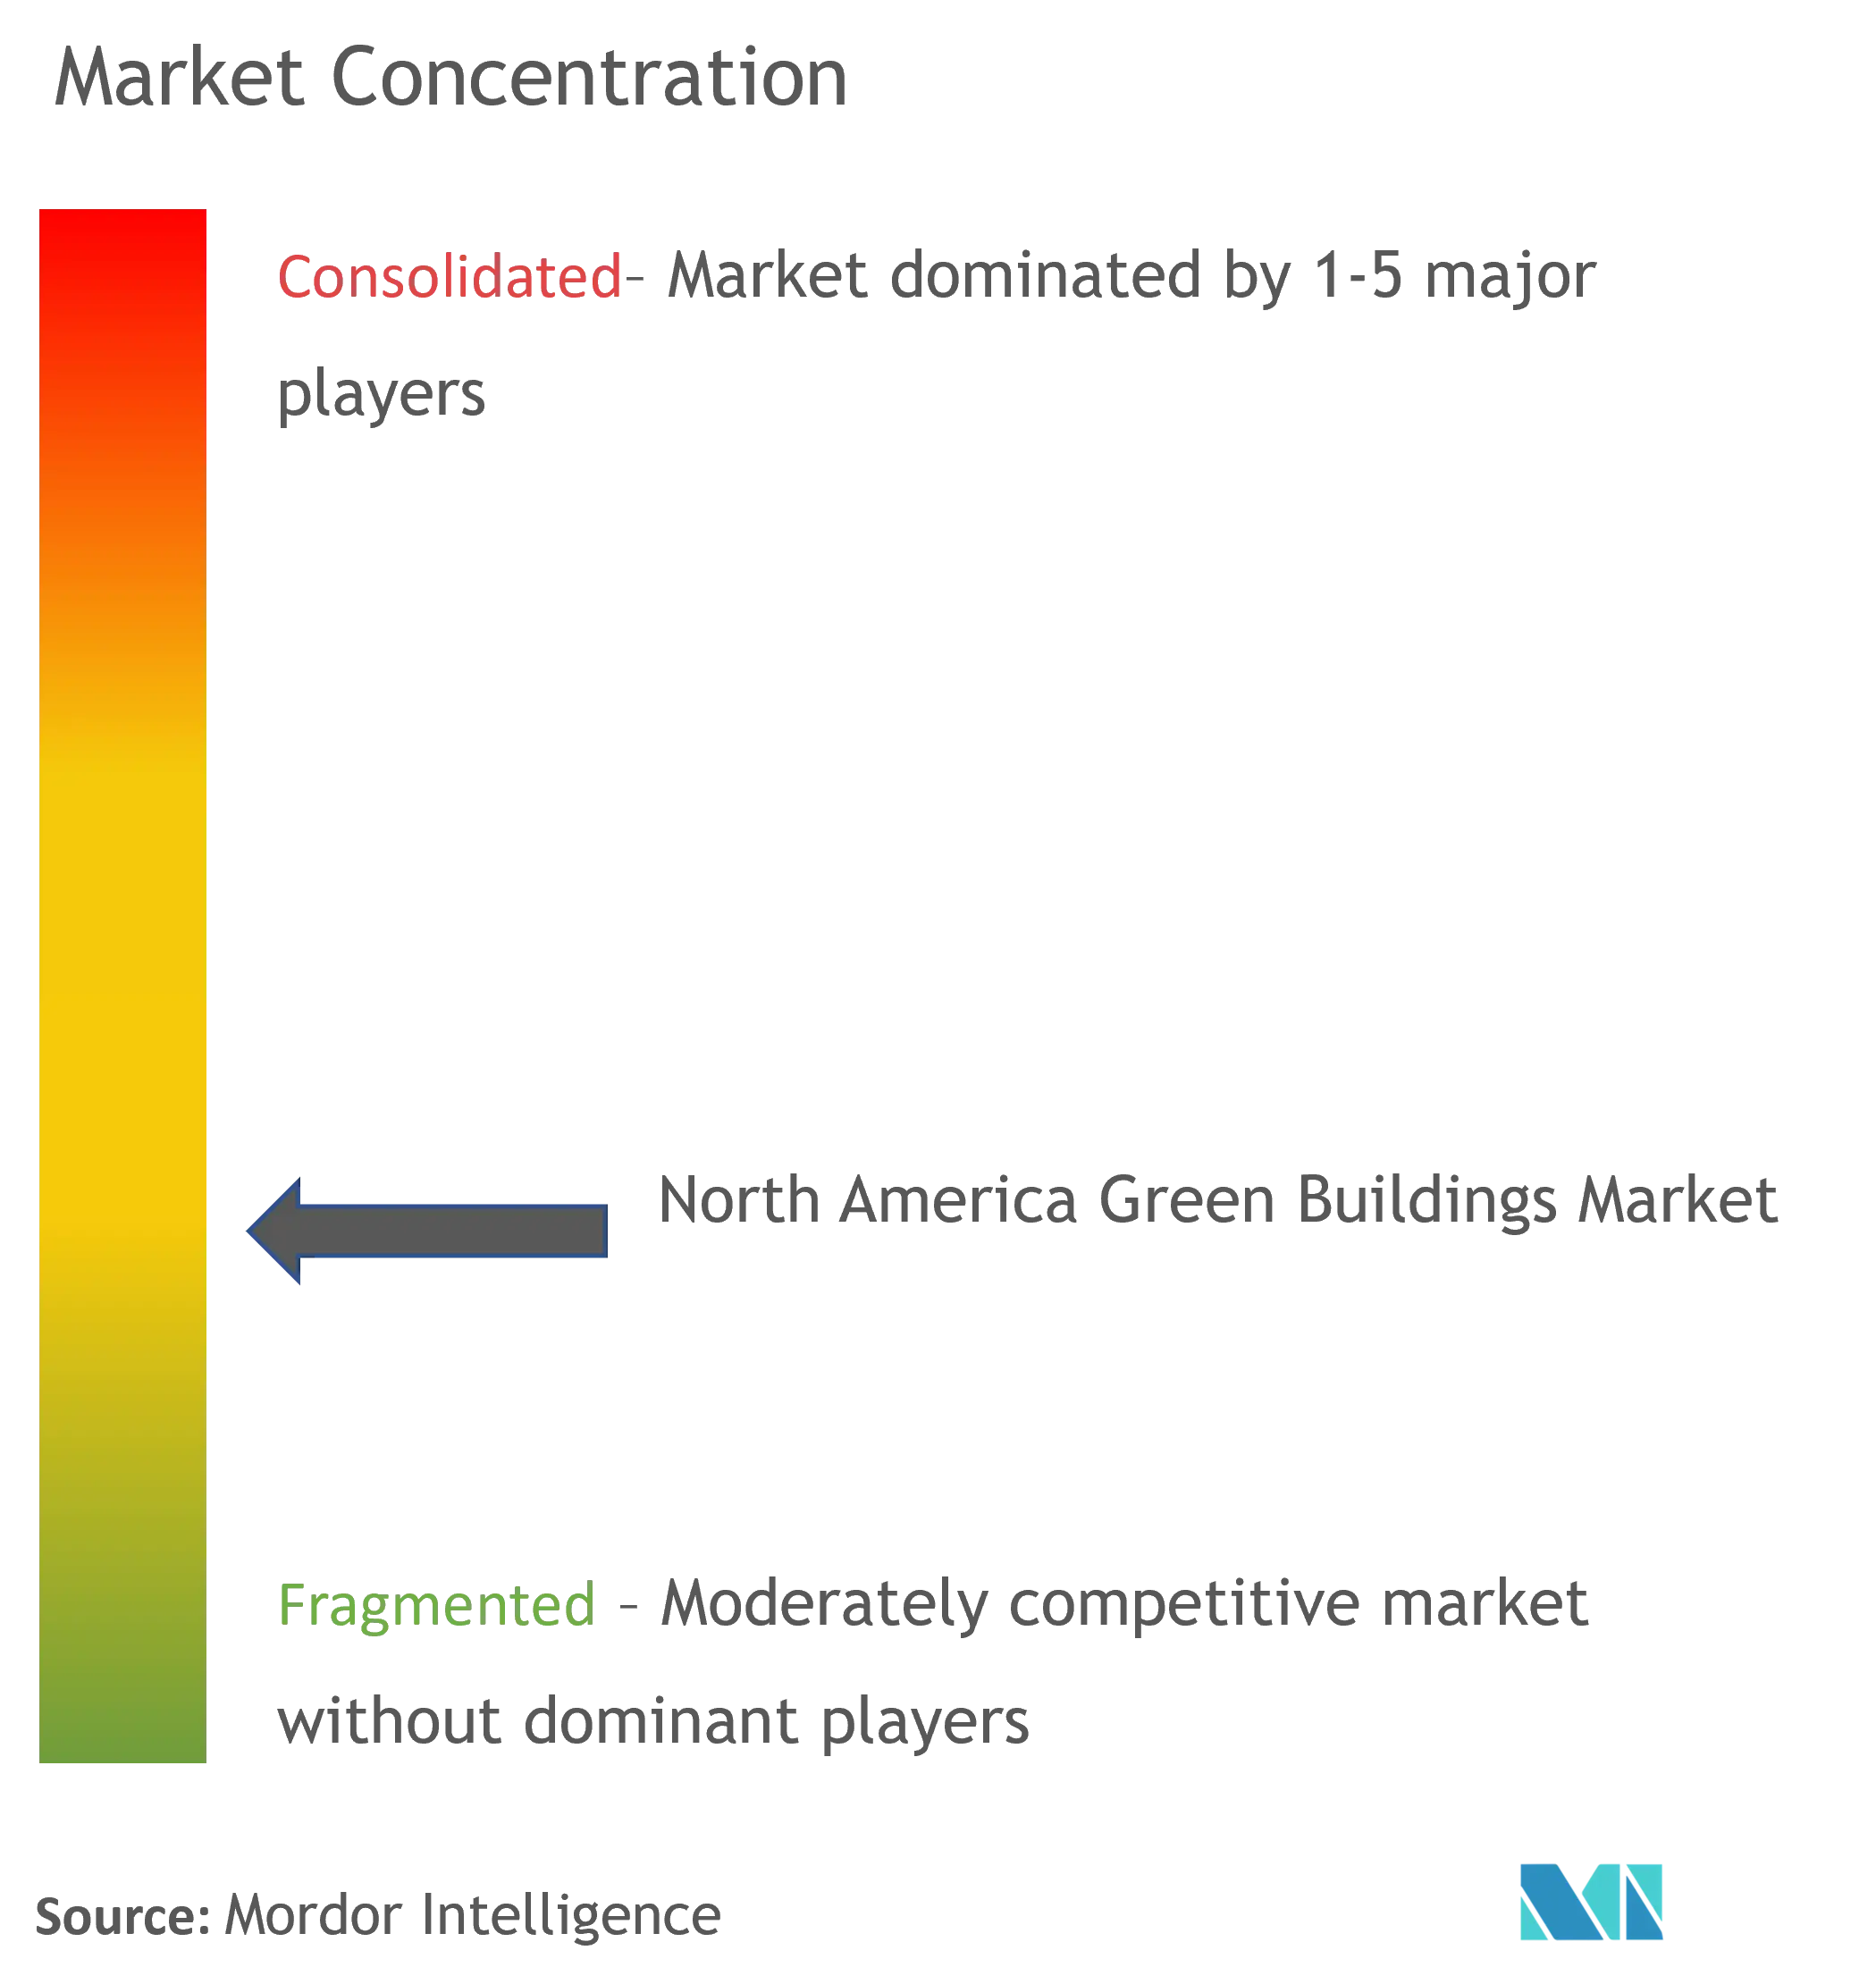 North America Green Buildings Market Concentration